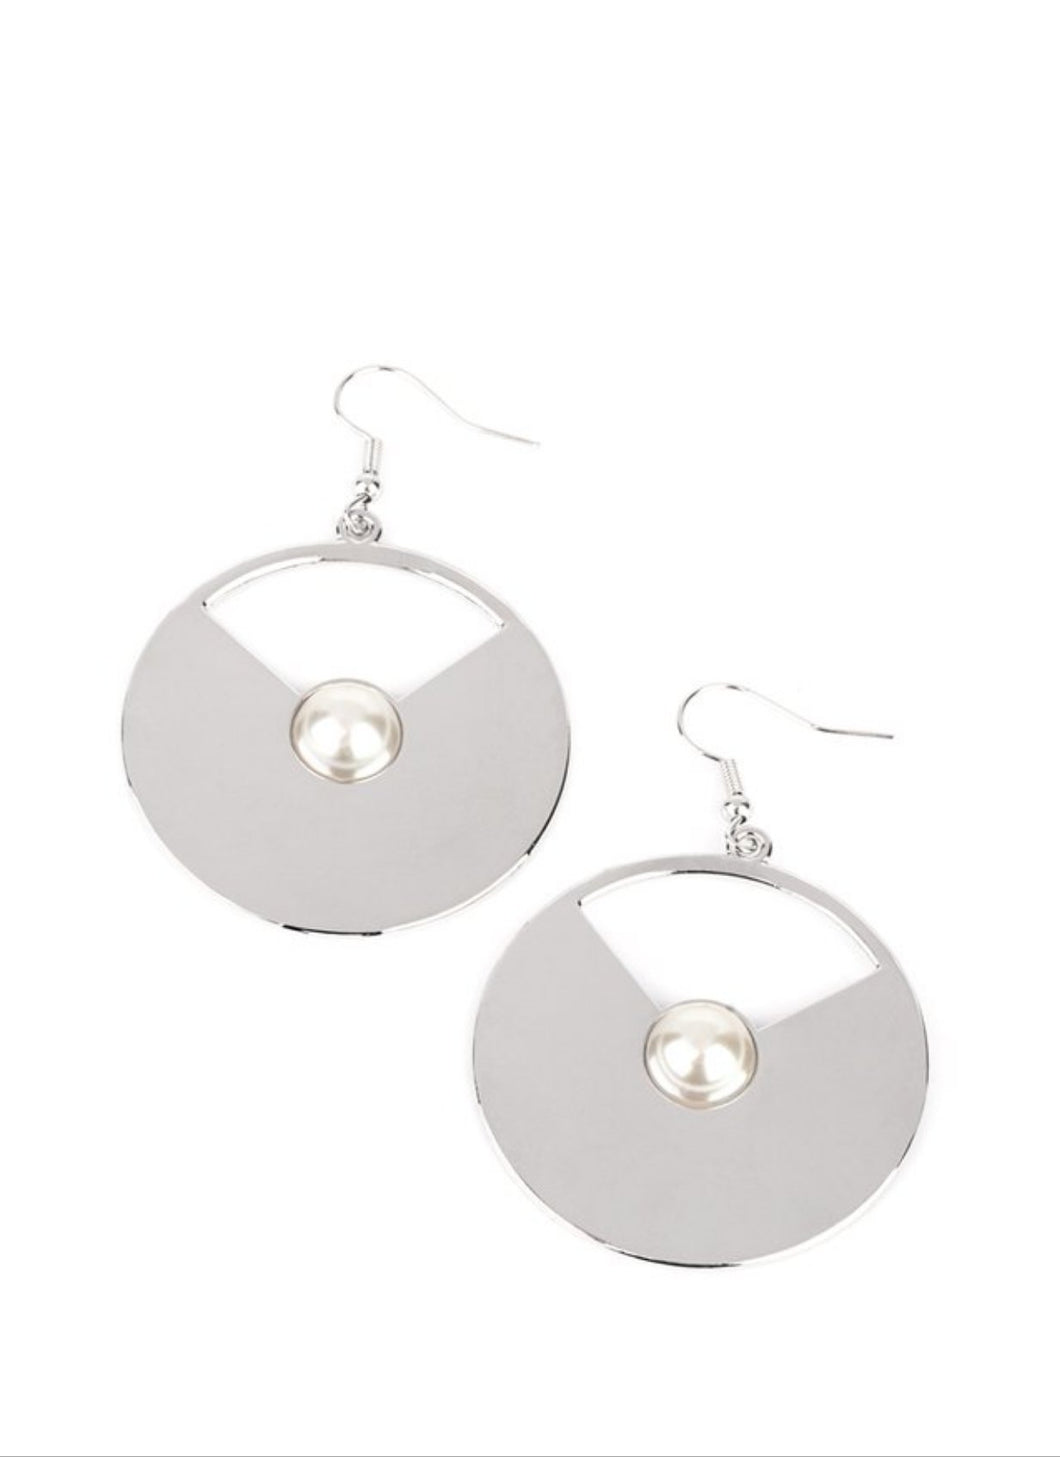 Record-Breaking Brilliance Silver and Pearl Earrings